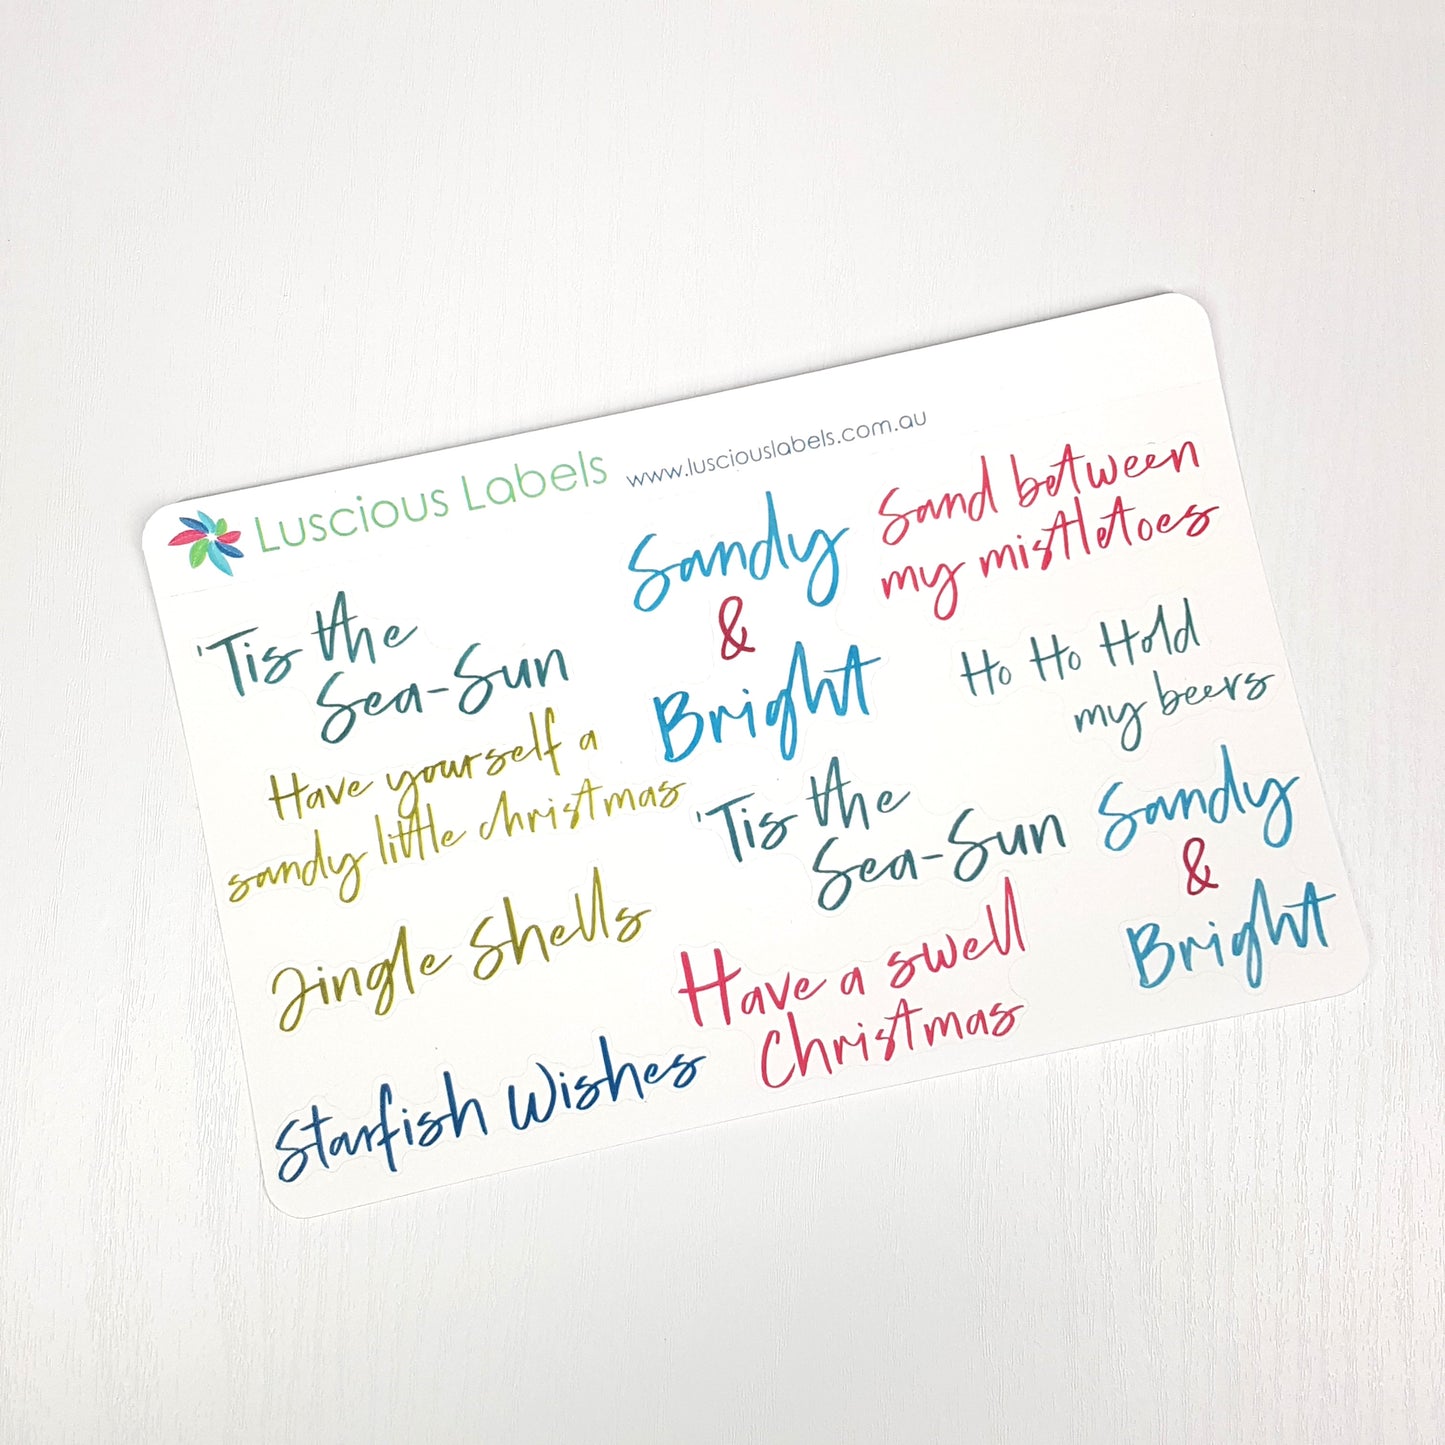 Sandy & Bright Christmas Decorative Stickers with festive punny sentiments